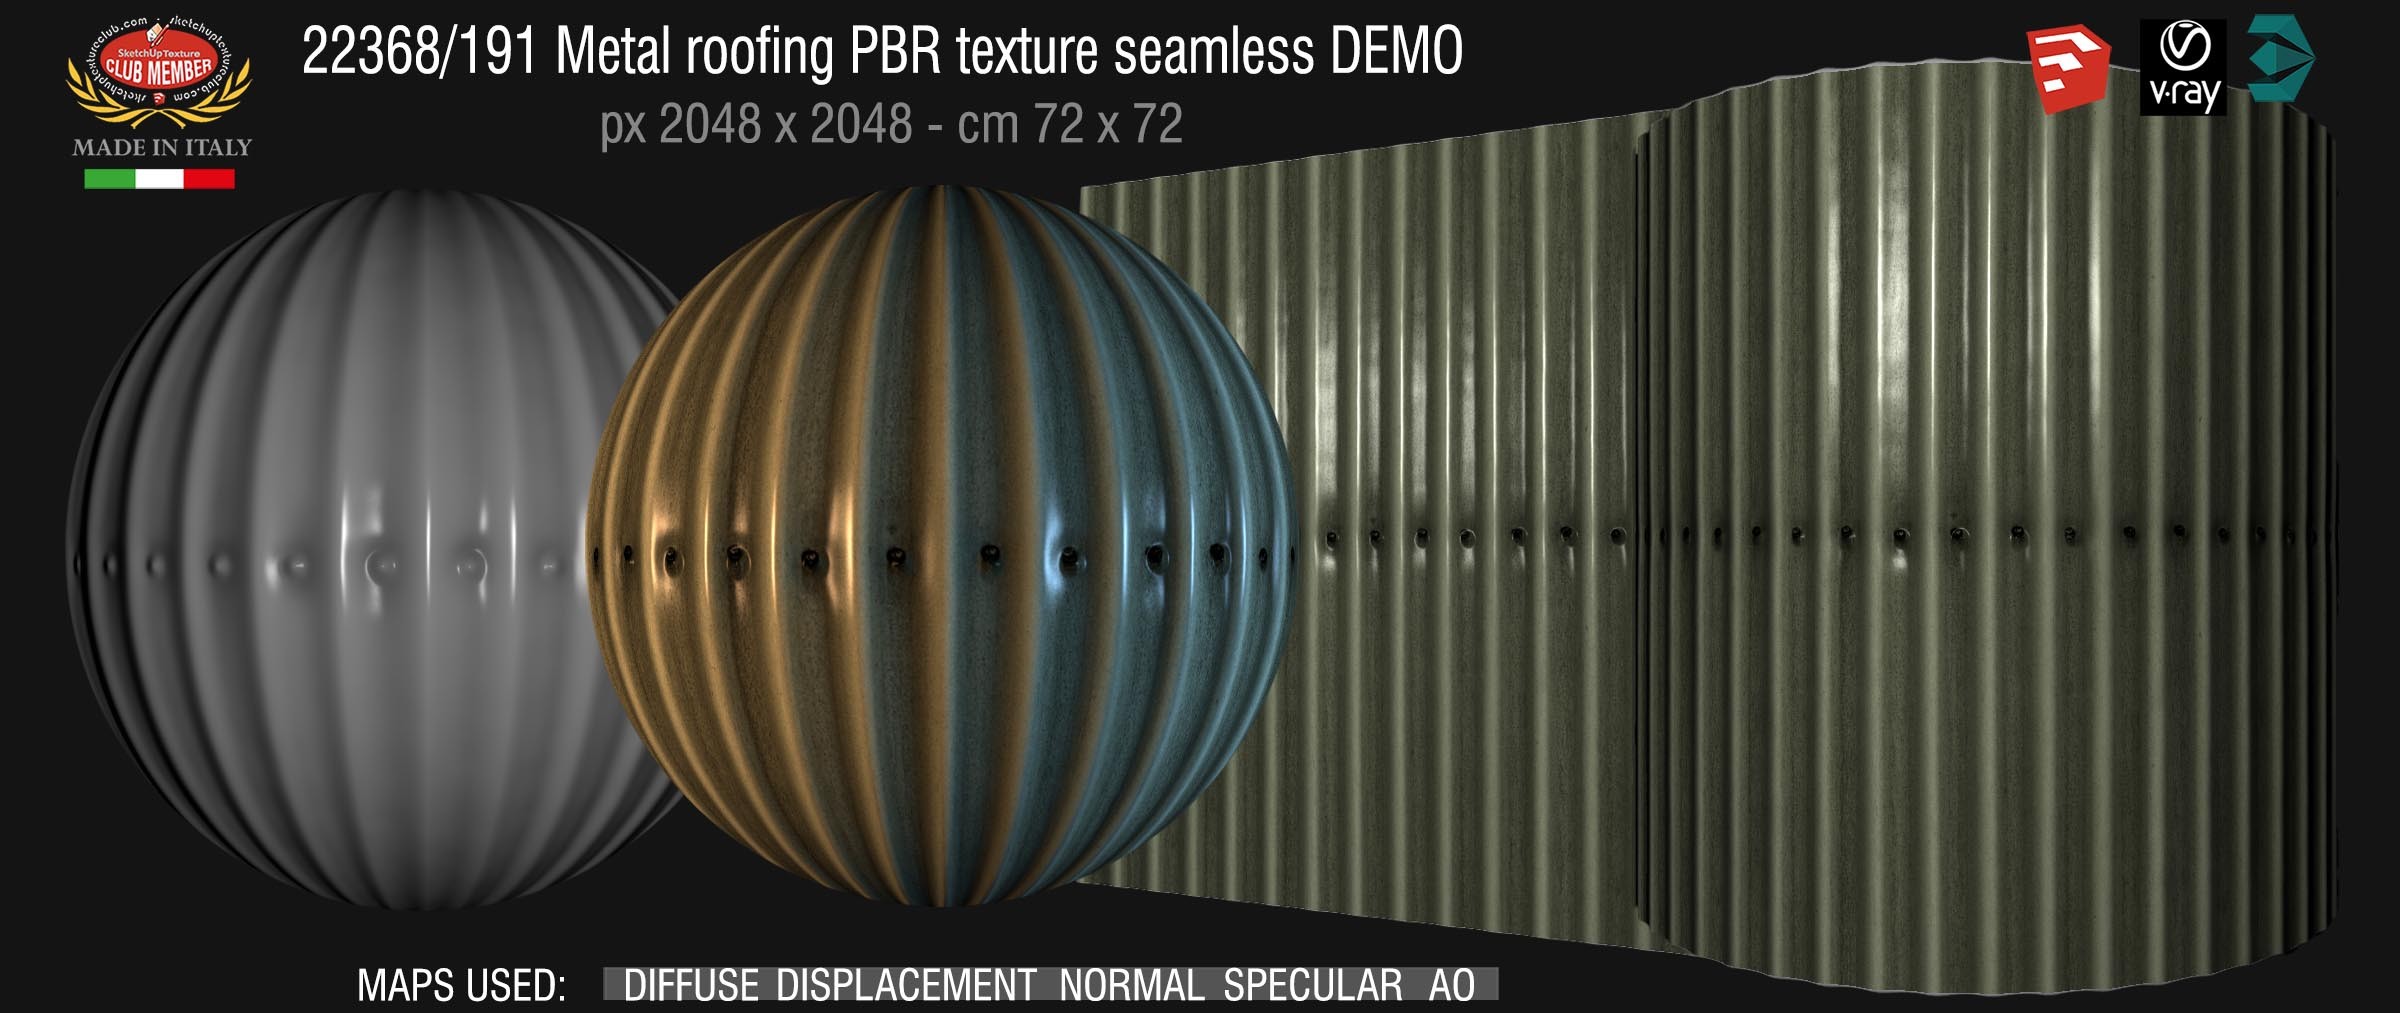 22368_191 Metal roofing PBR texture seamless DEMO